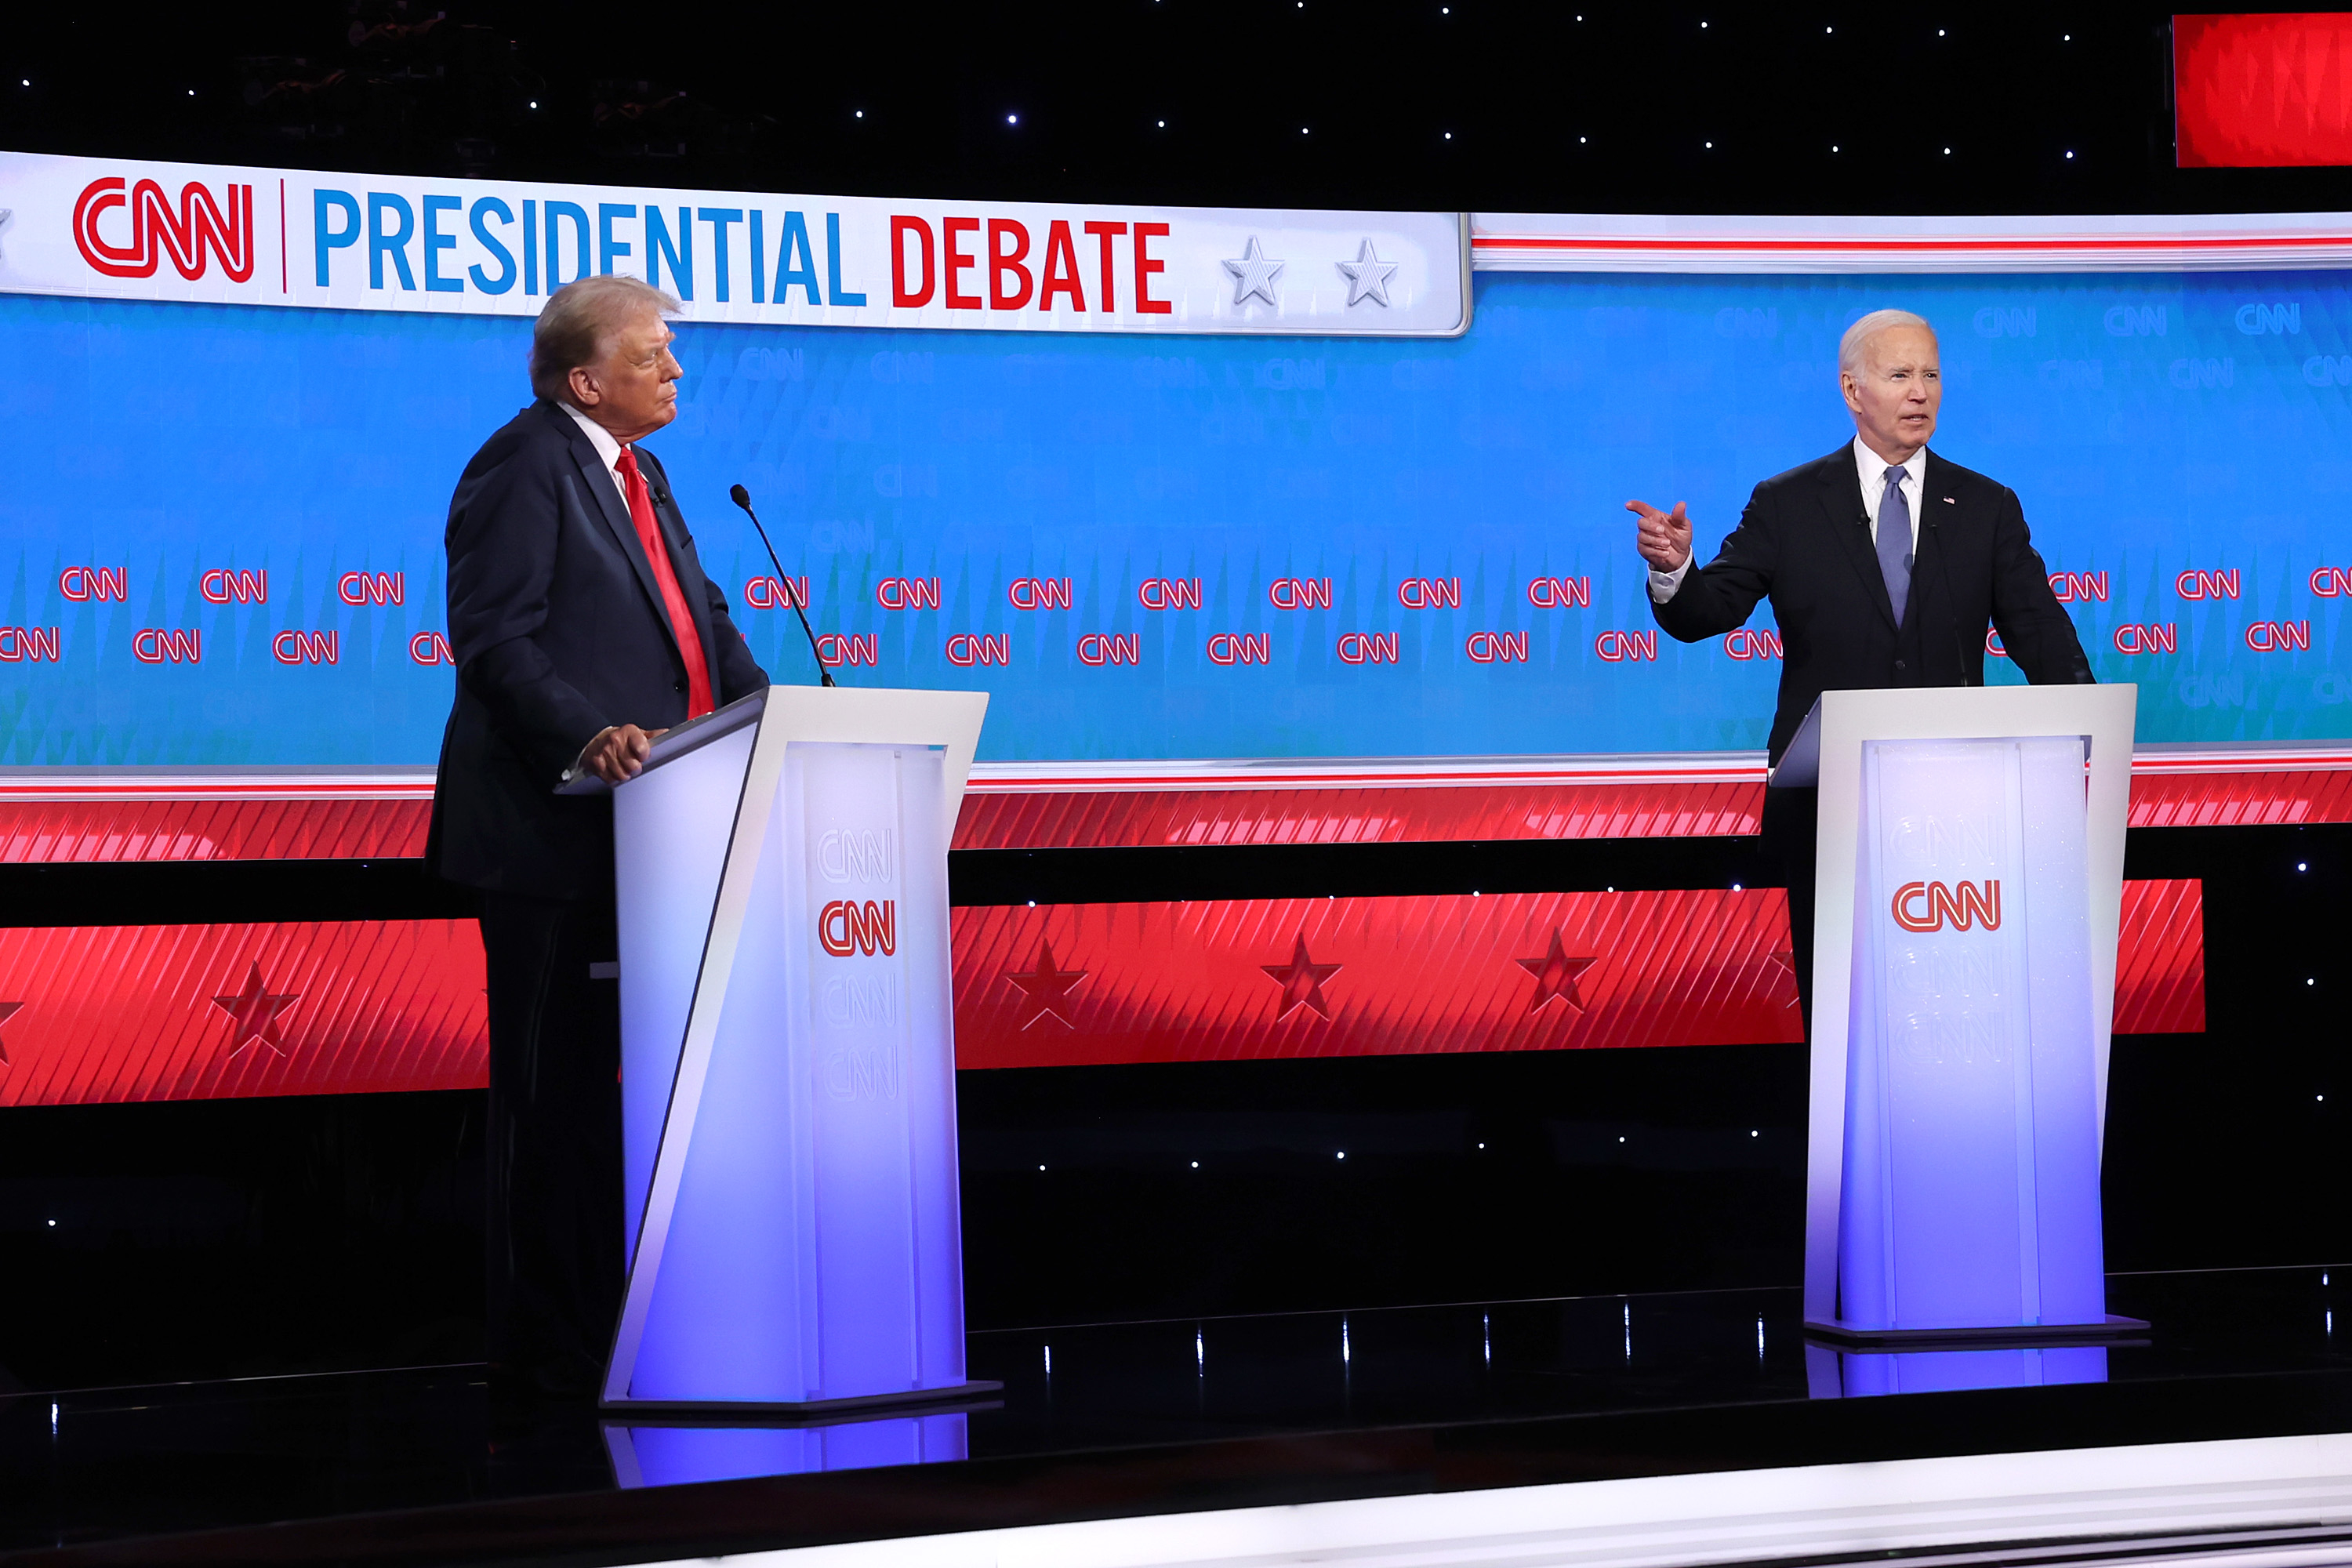 Donald Trump and Joe Biden stand at podiums on a stage during a CNN Presidential Debate. Trump gestures, while Biden speaks